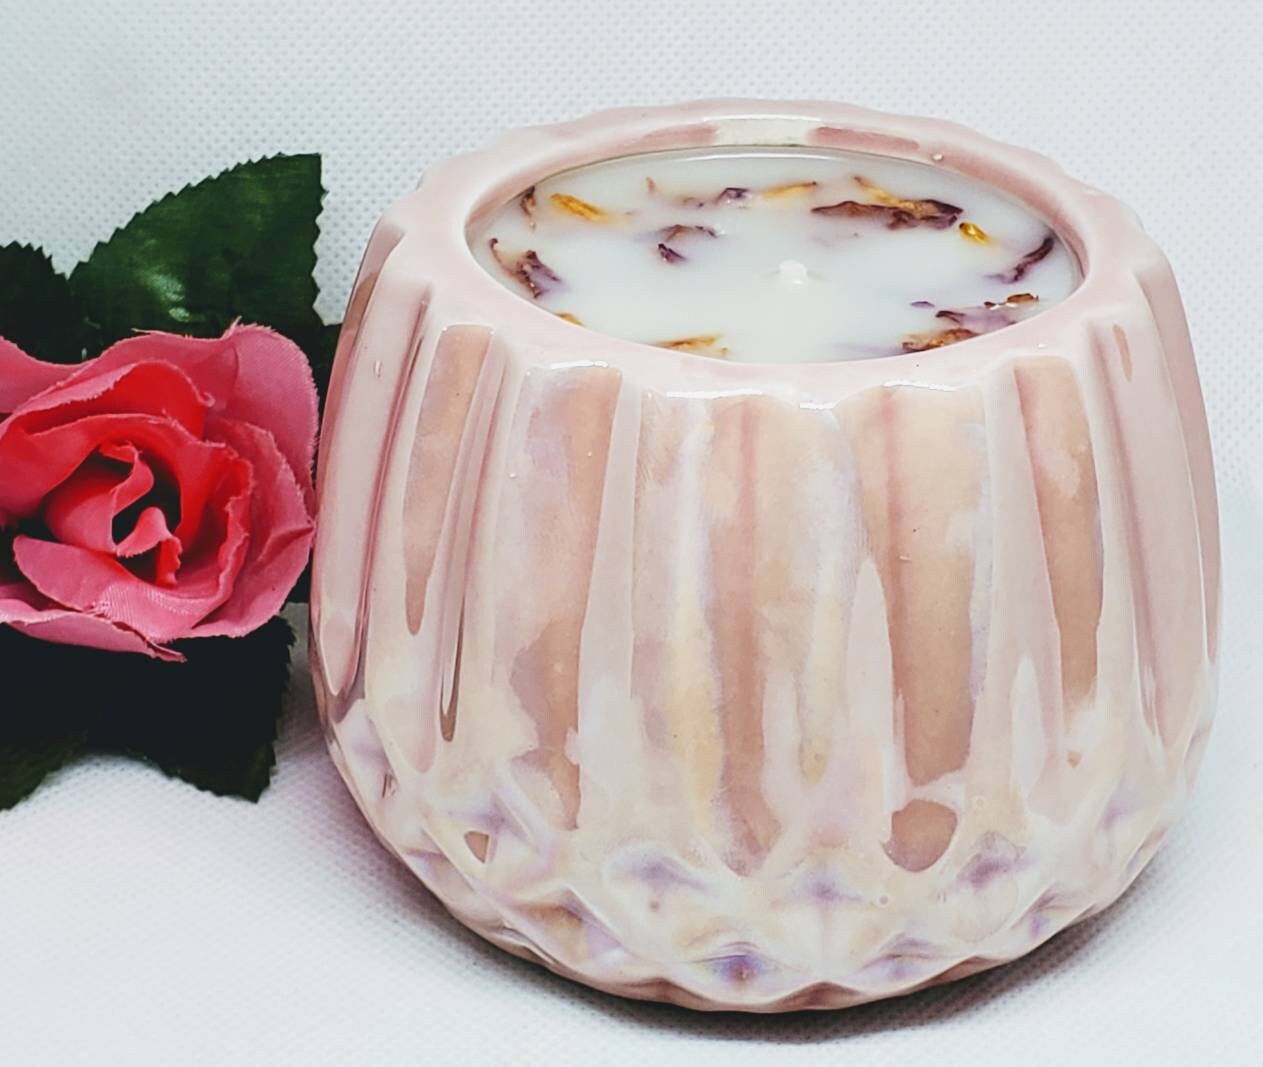 Hand-Picked Dried Oregon Flowers 6oz Rose Garden Soy Candle Hand Poured